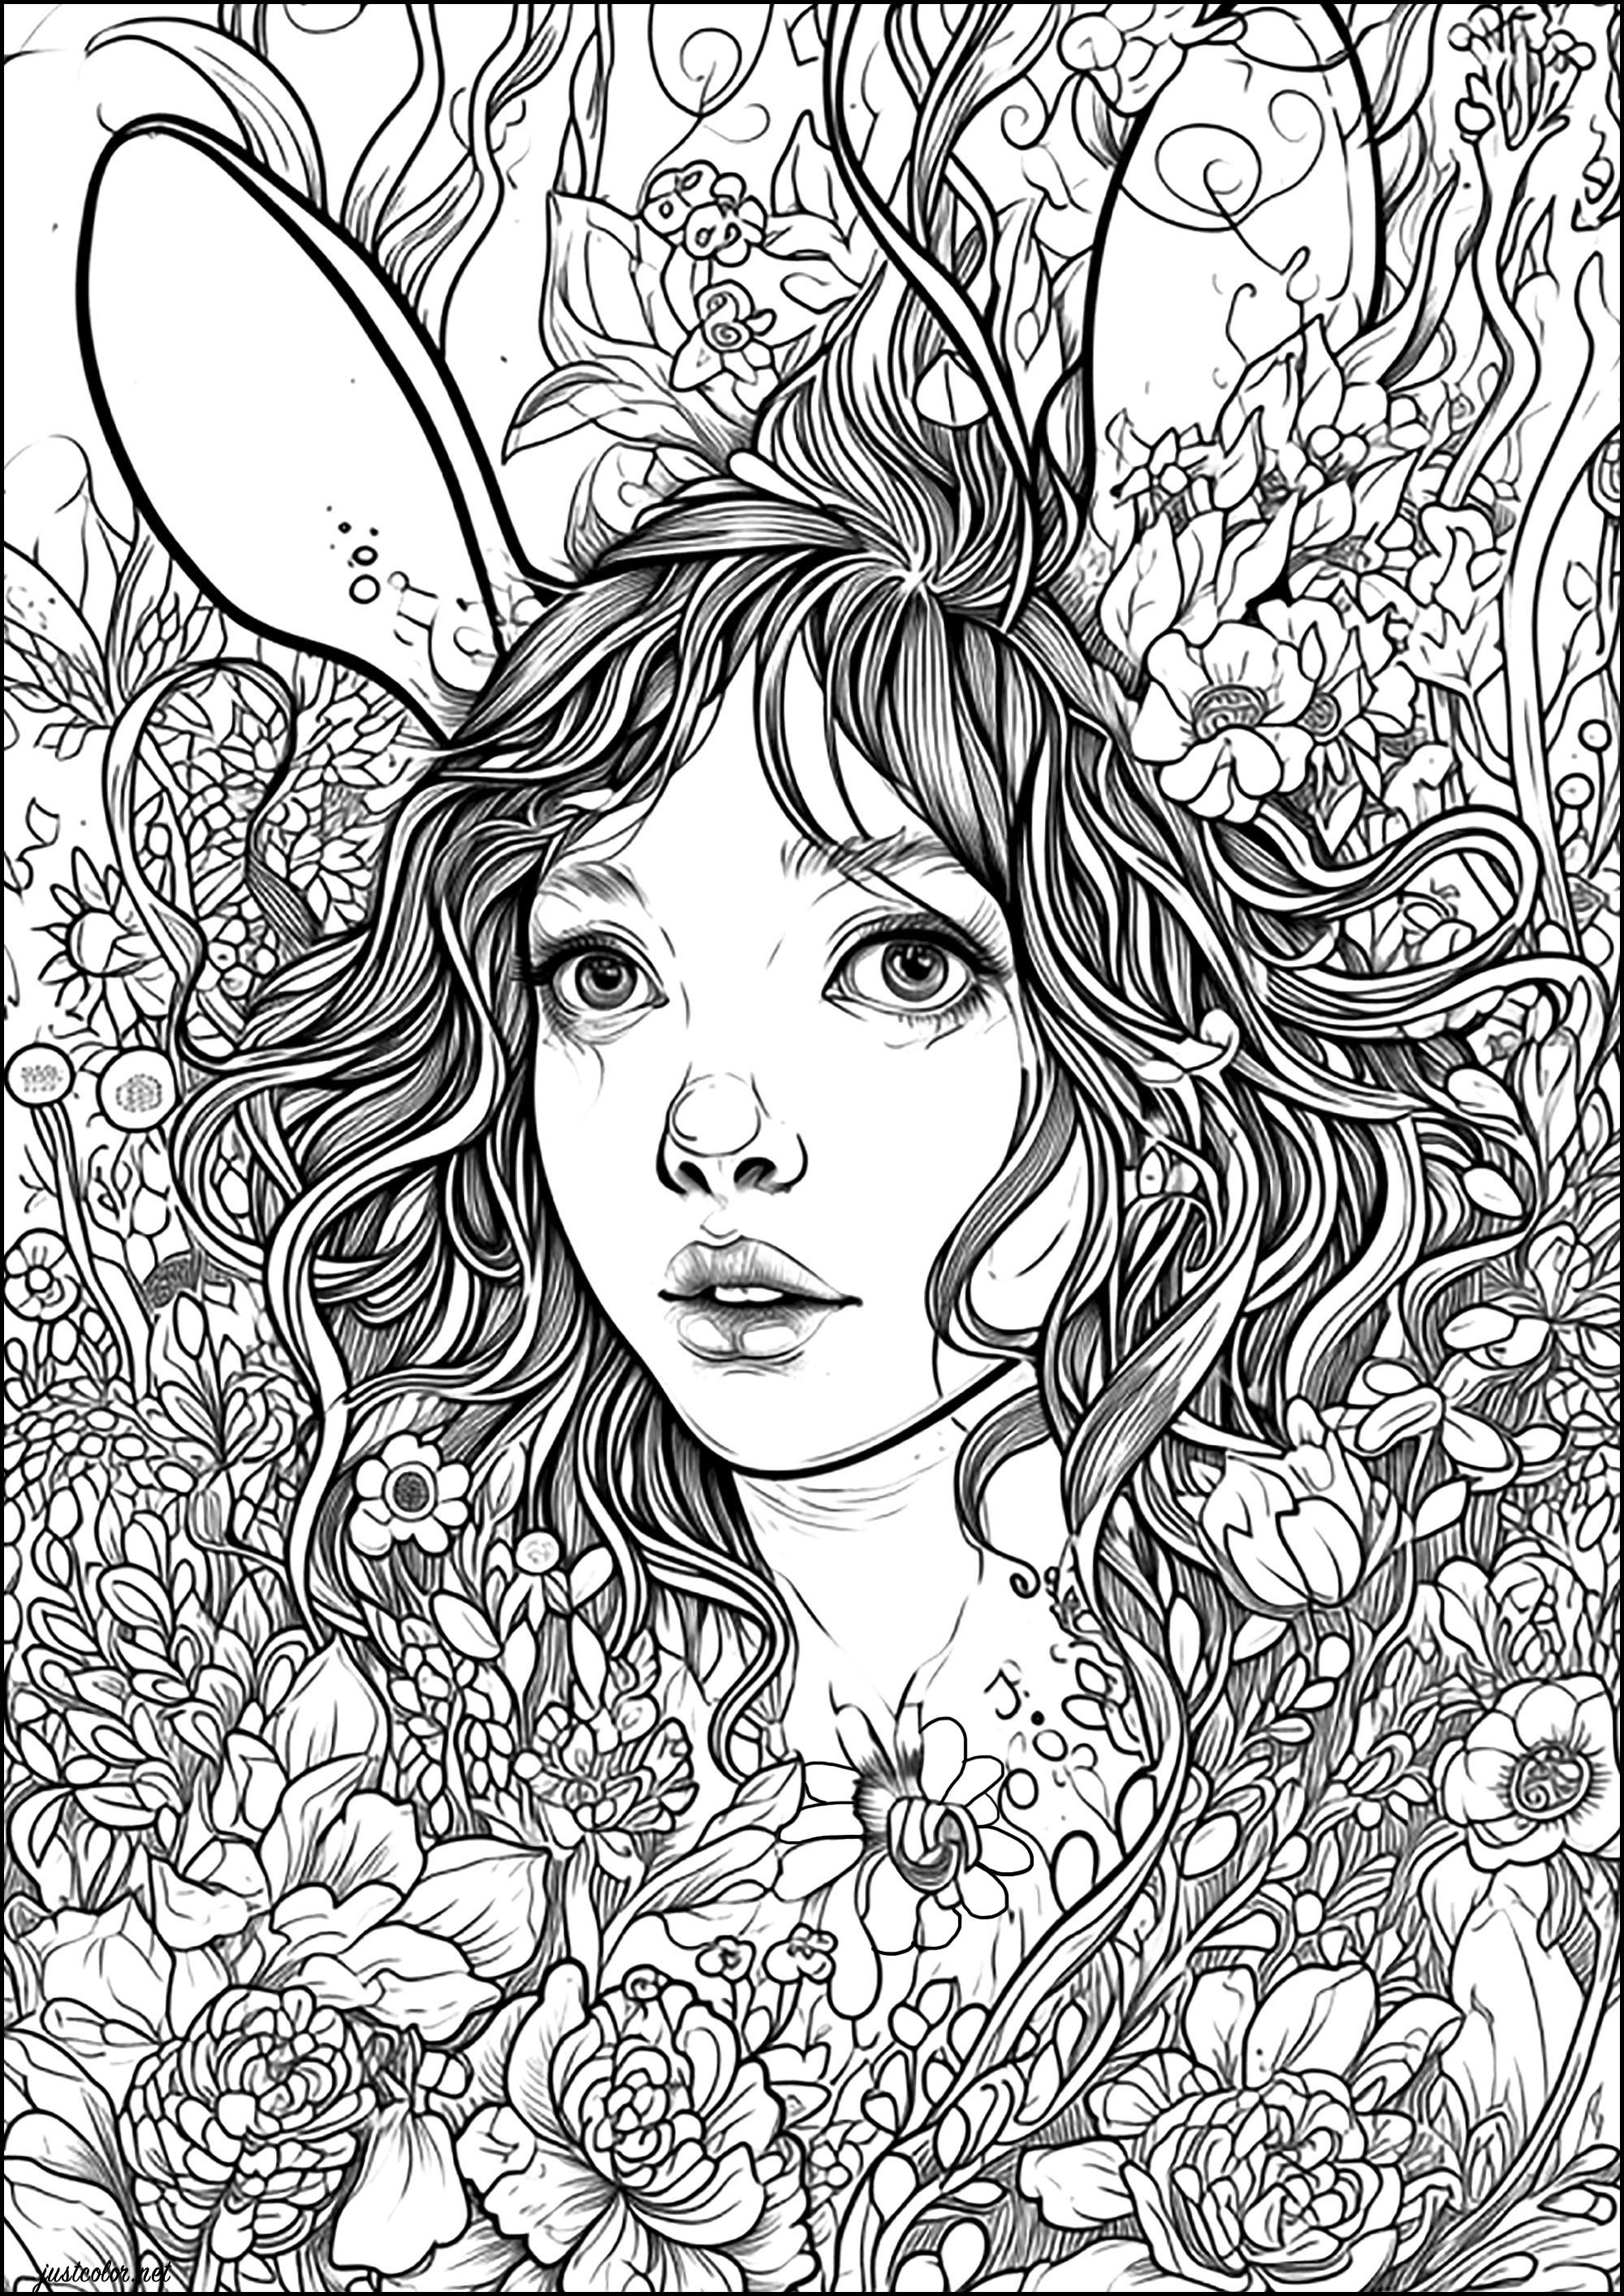 The rabbit woman. A spell turns this young woman into a rabbit... She hides among the flowers, waiting for someone to save her.